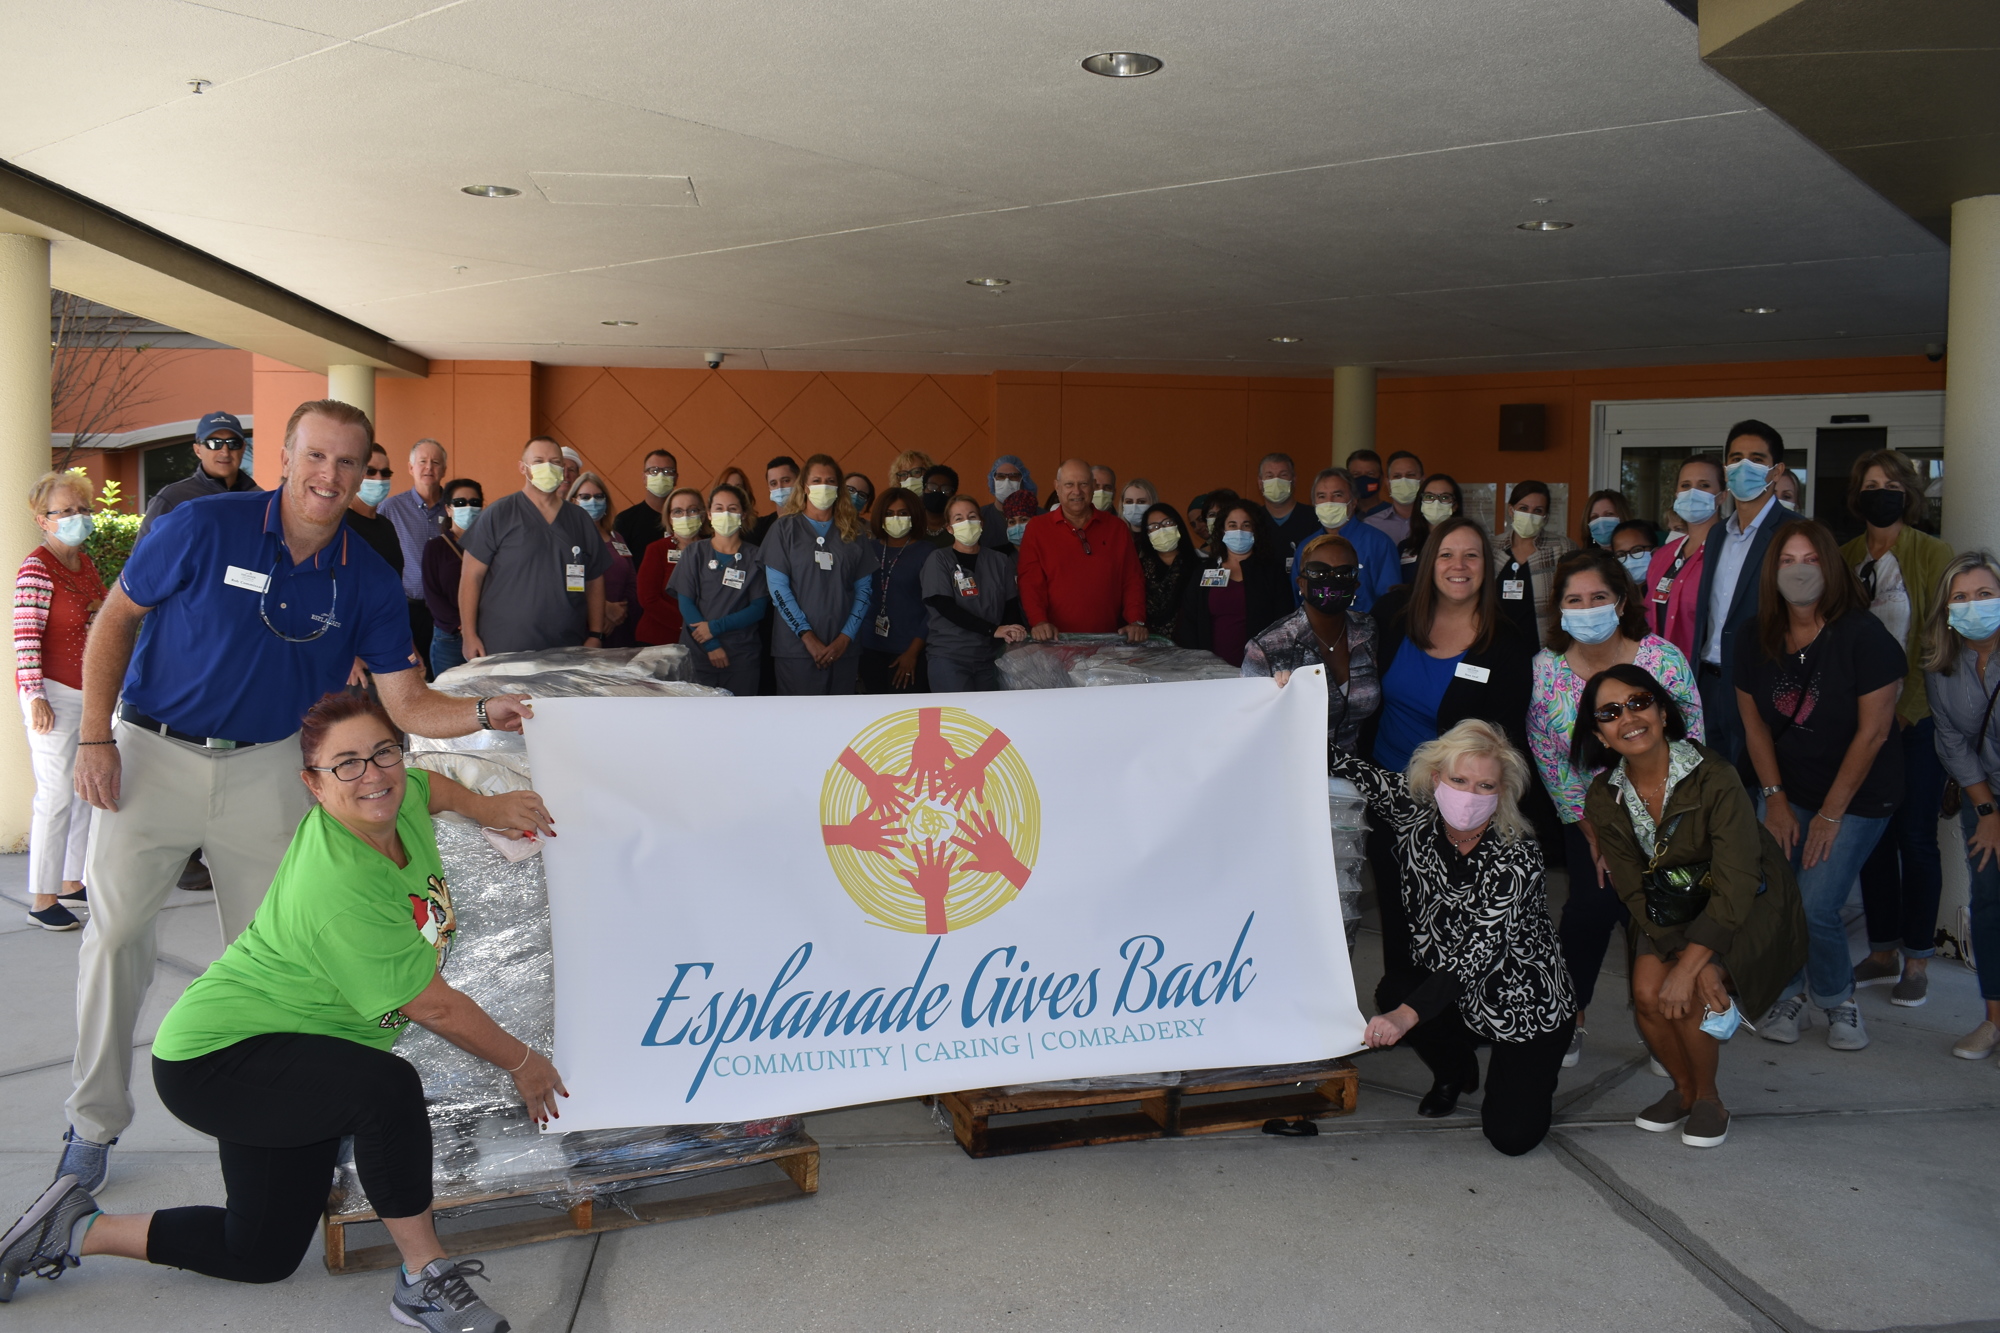 The Esplanade Gives Back program donated 1,033 lunches to the staff of Lakewood Ranch Medical Center on Nov. 30.